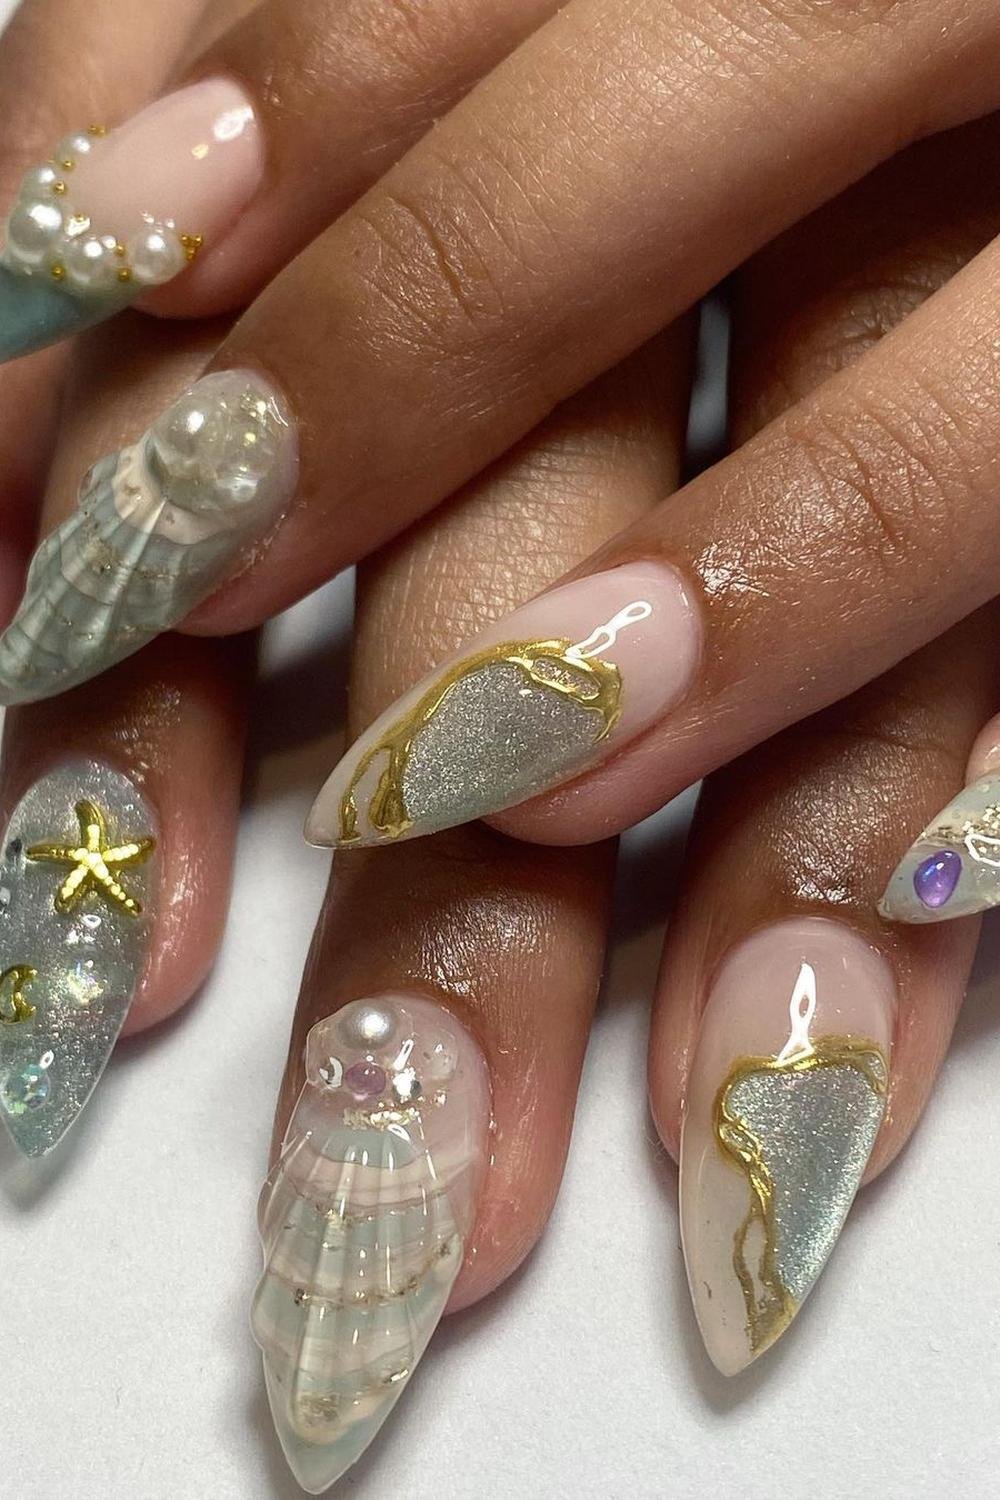 11 - Picture of Whimsical Nails